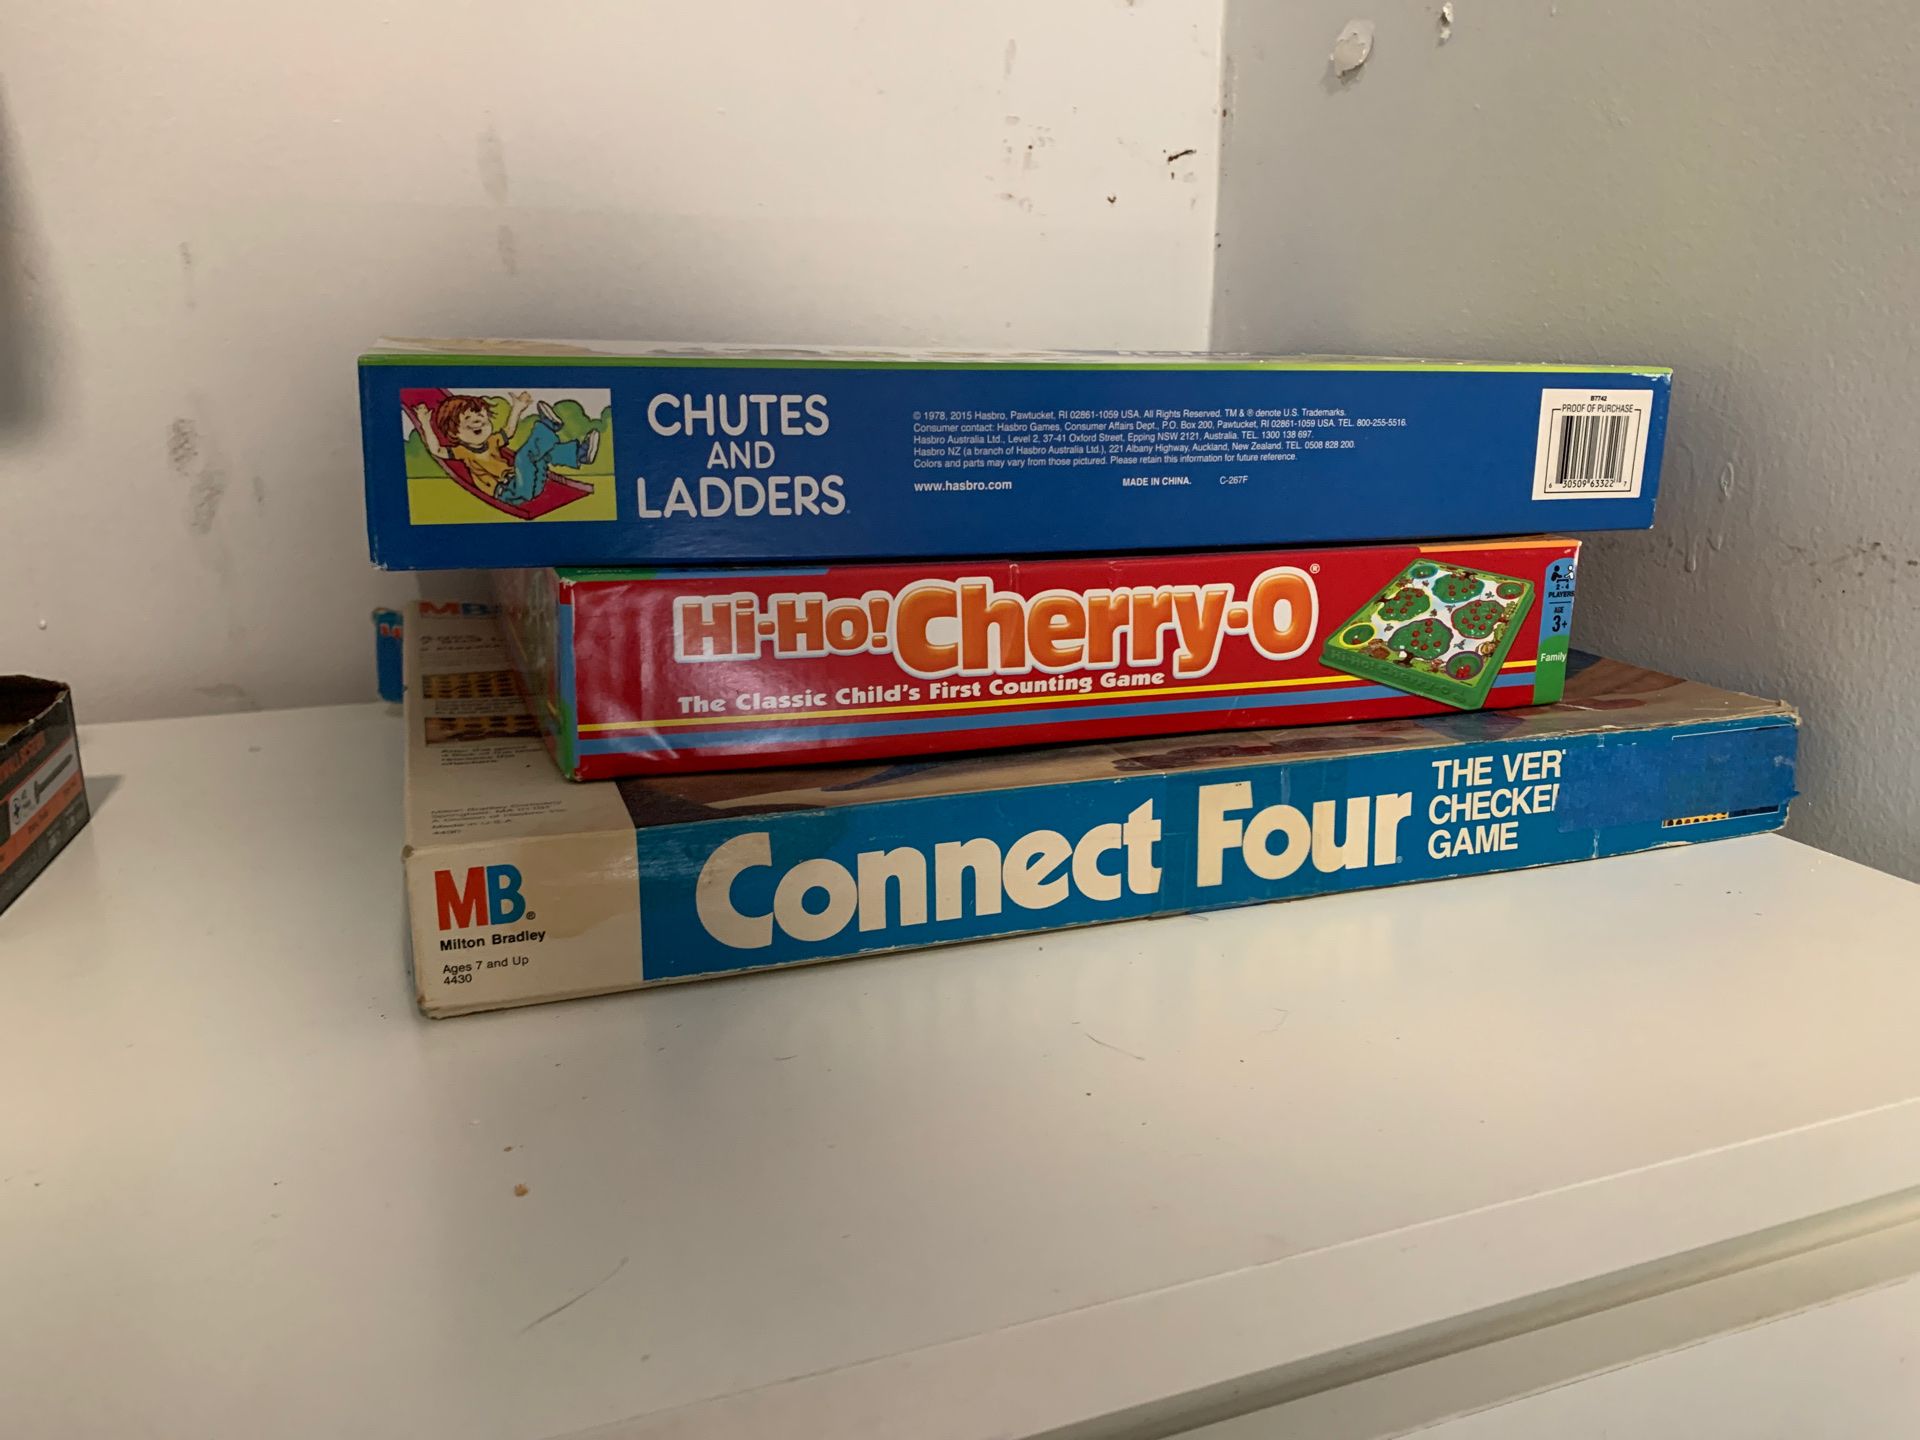 Board games - Chutes and Ladders + Hi Hi Cherry O + Connect Four 4